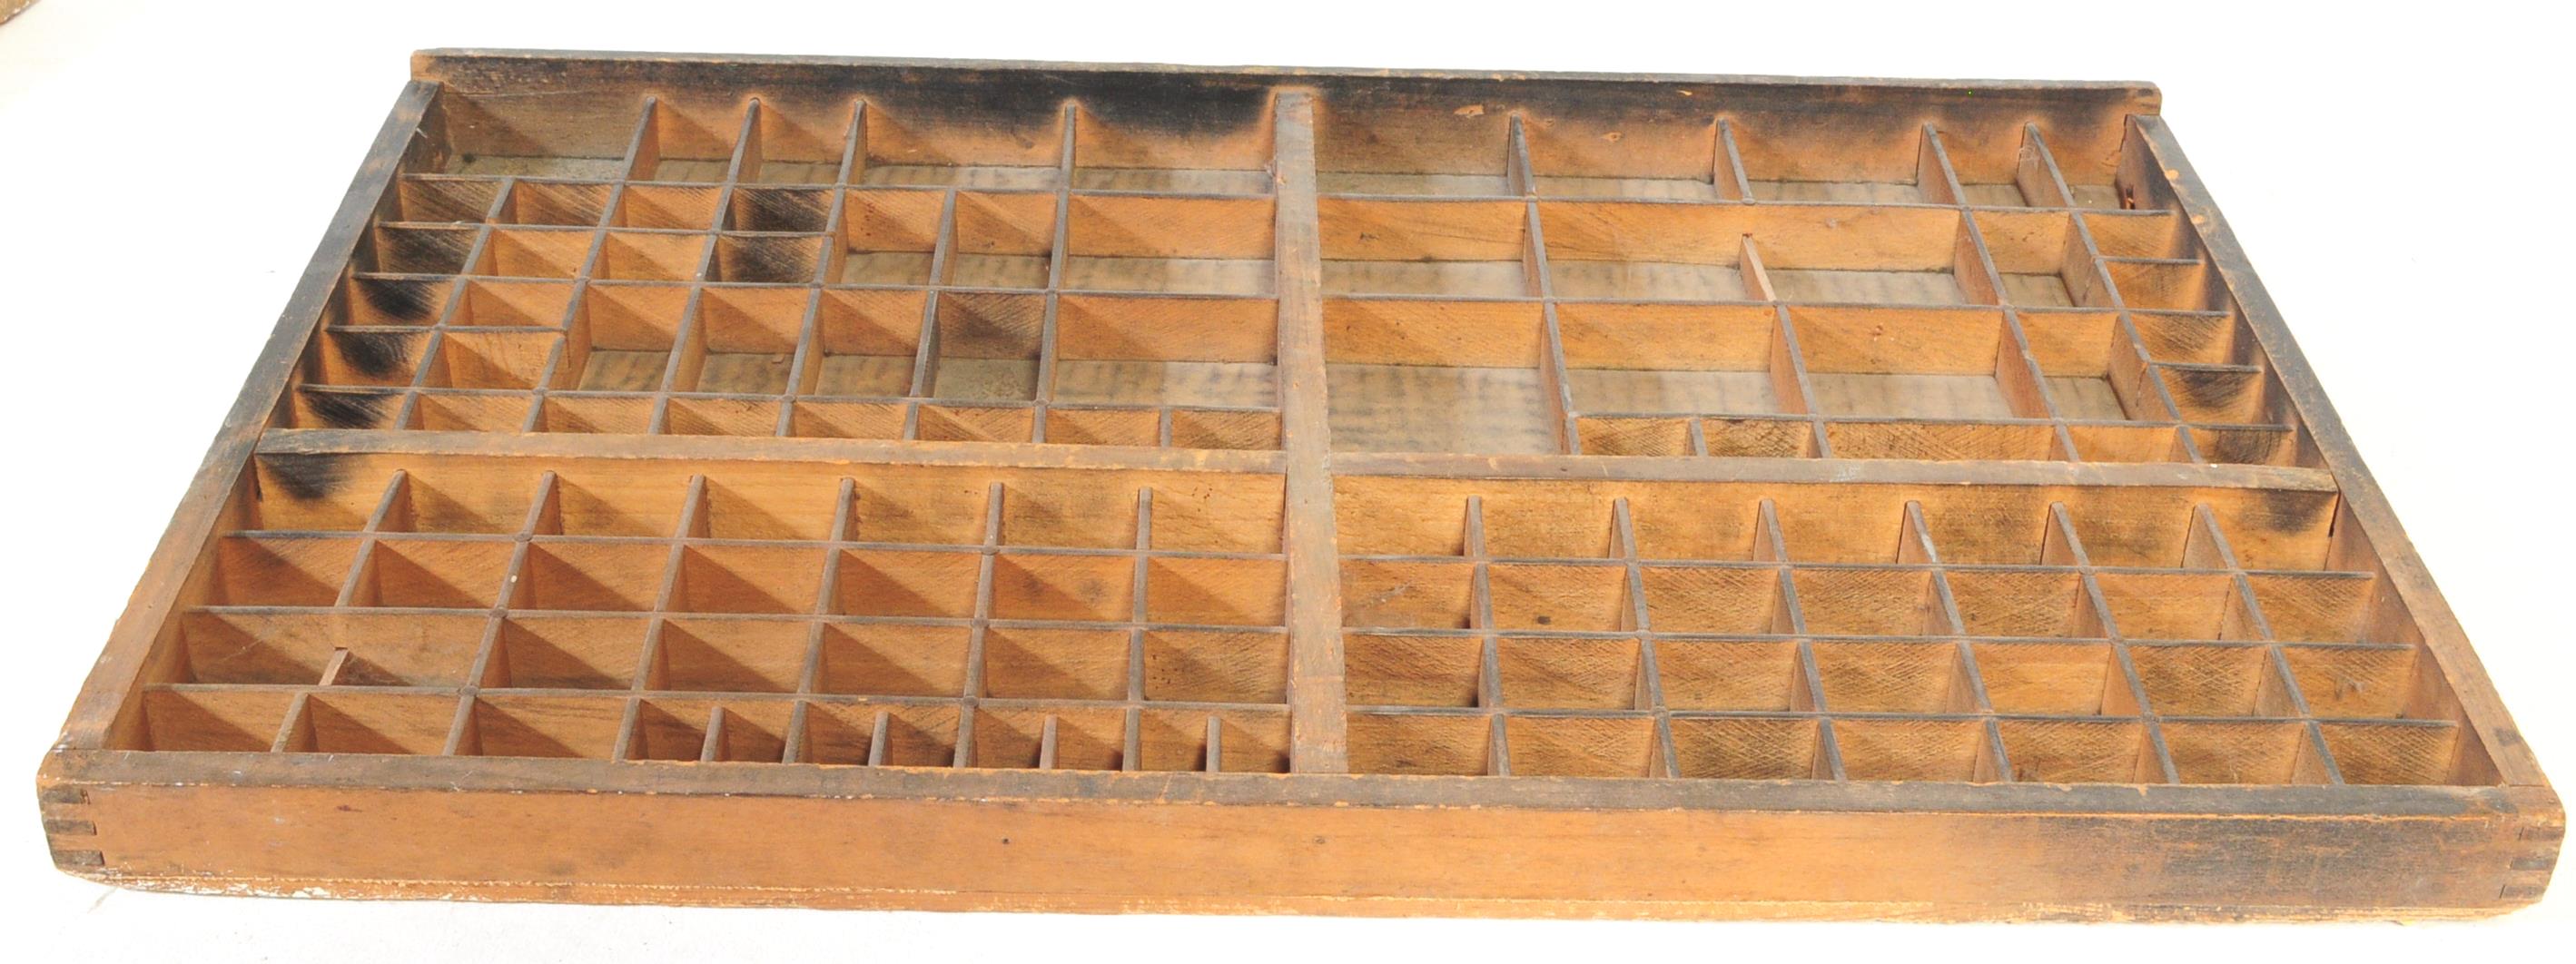 TWO EARLY 20TH CENTURY WOODEN PRINTER TRAYS - Image 3 of 5